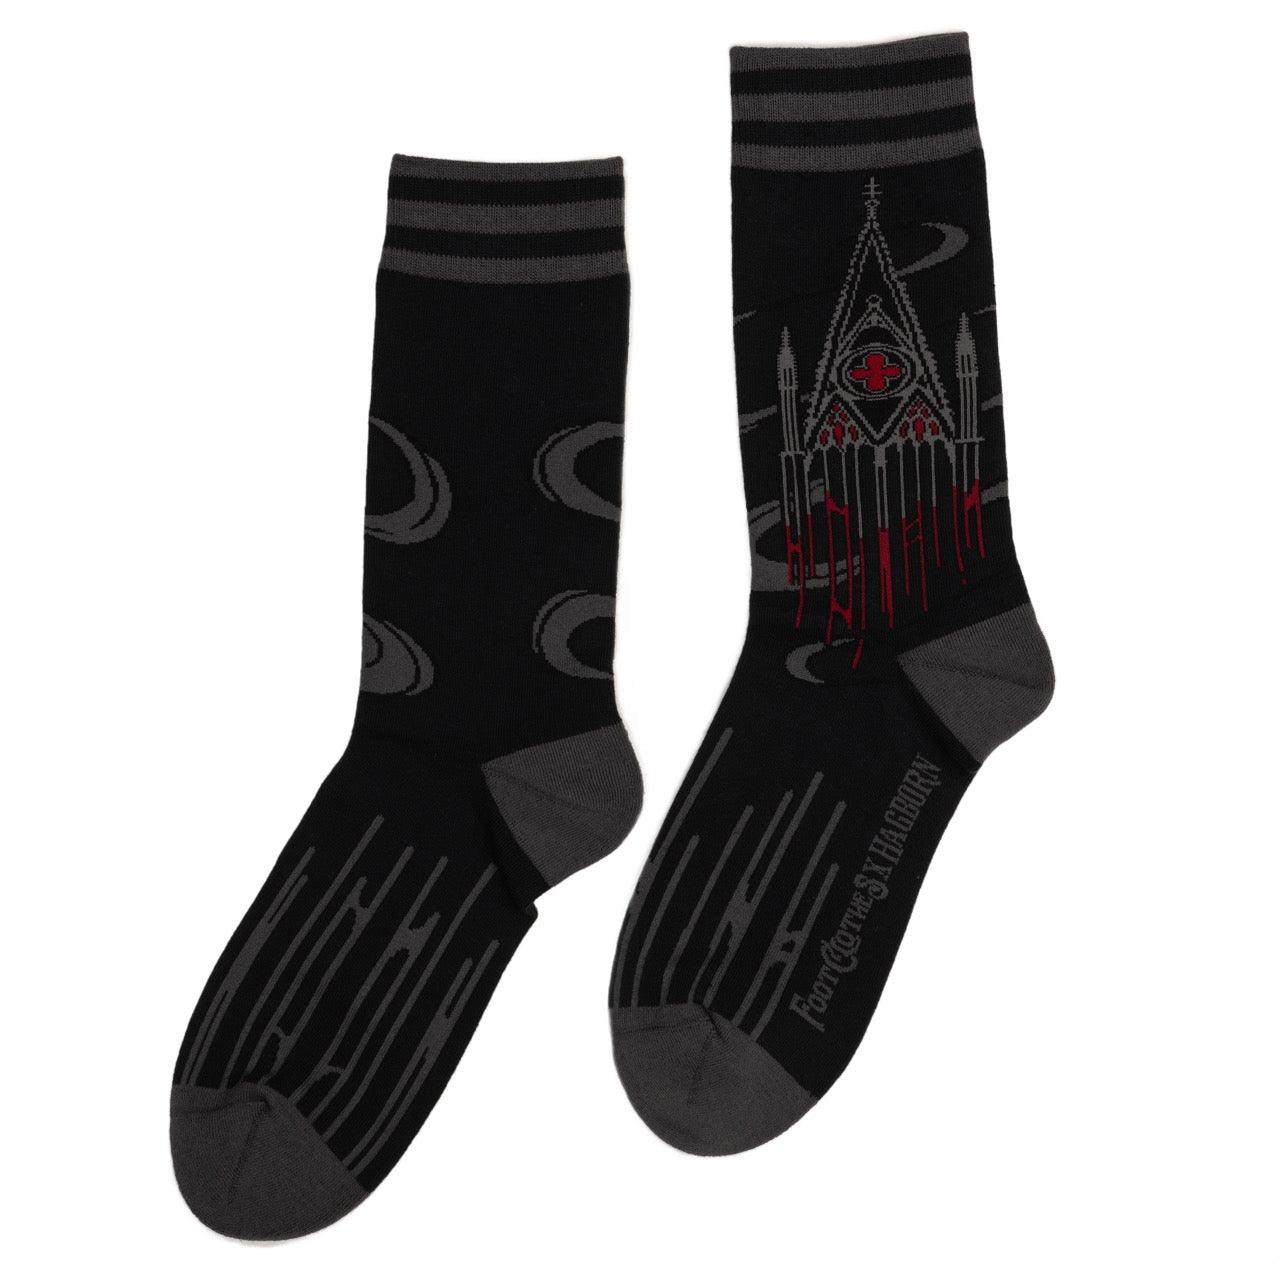 Blood Cathedral FootClothes x Hagborn Collab Socks - FootClothes